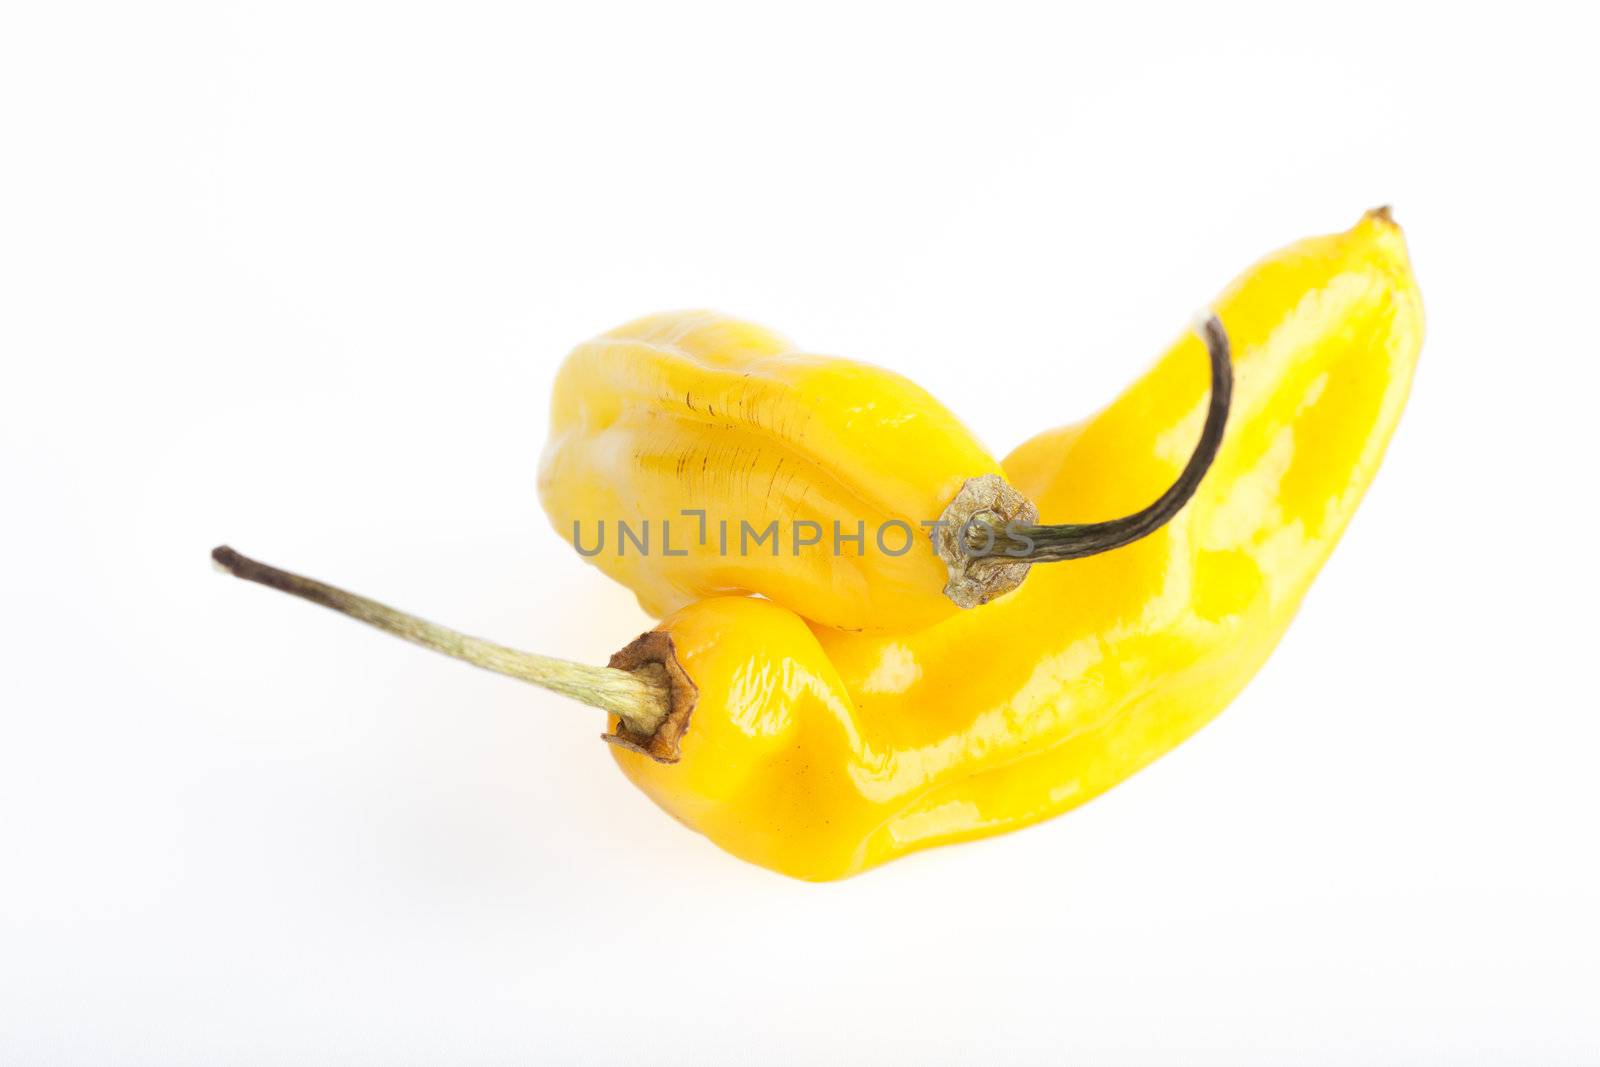 Two yellow hot peppers on white background.